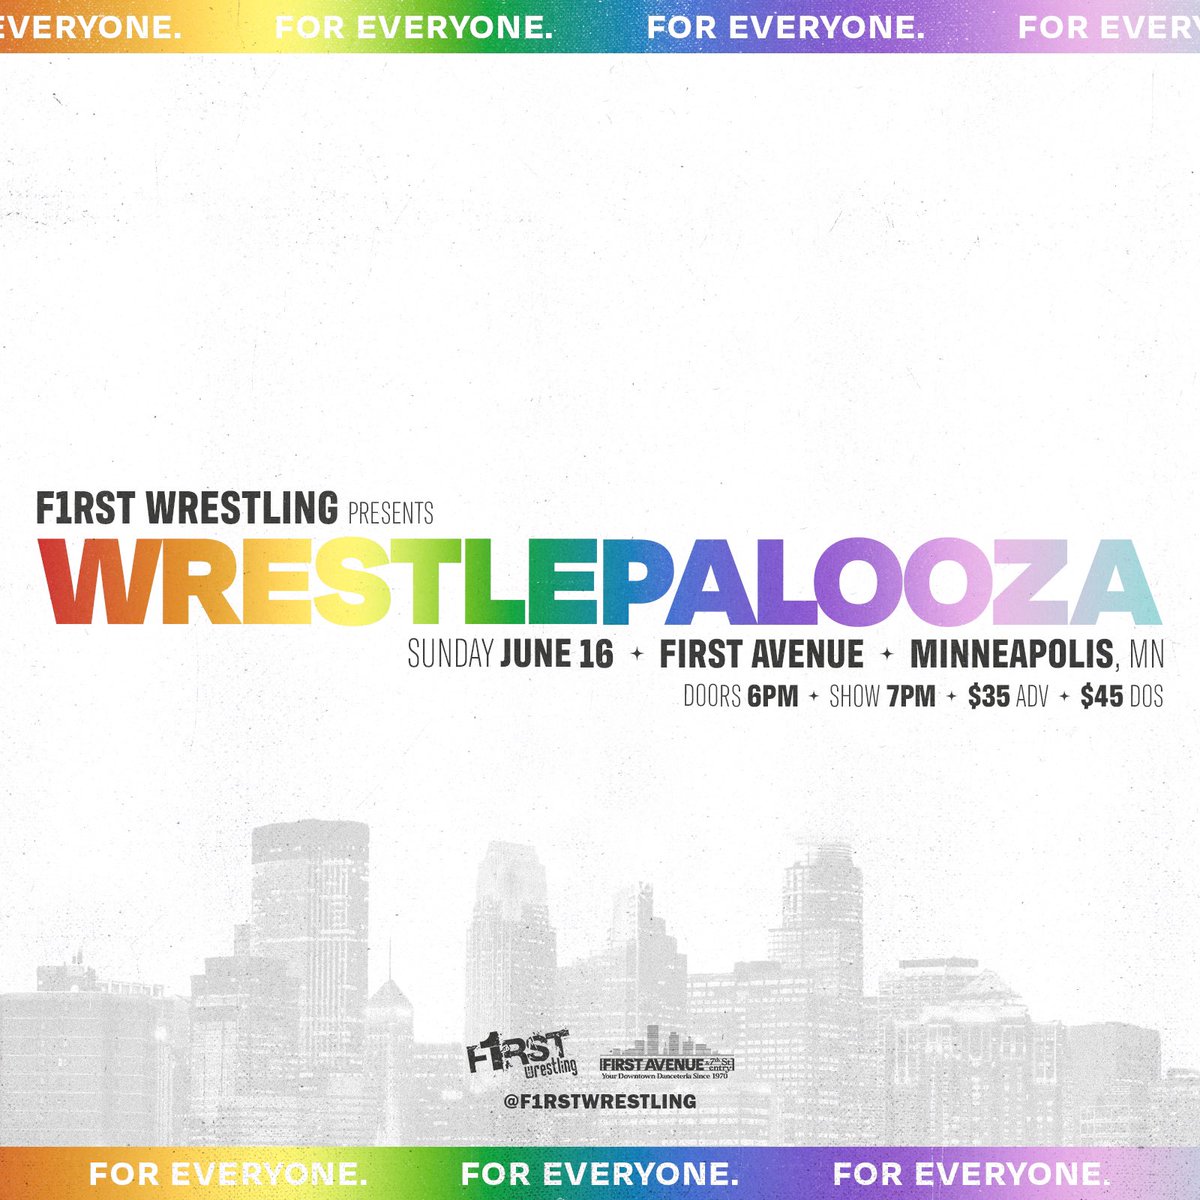 #WRESTLEPALOOZA SUNDAY | June 16th Minneapolis, MN Doors 6pm | Show 7pm | 18+ Tickets: $35 ADV | $45 DOS ❗️TICKETS ARE SELLING FAST❗️ 🎟️ axs.com/events/531272/…